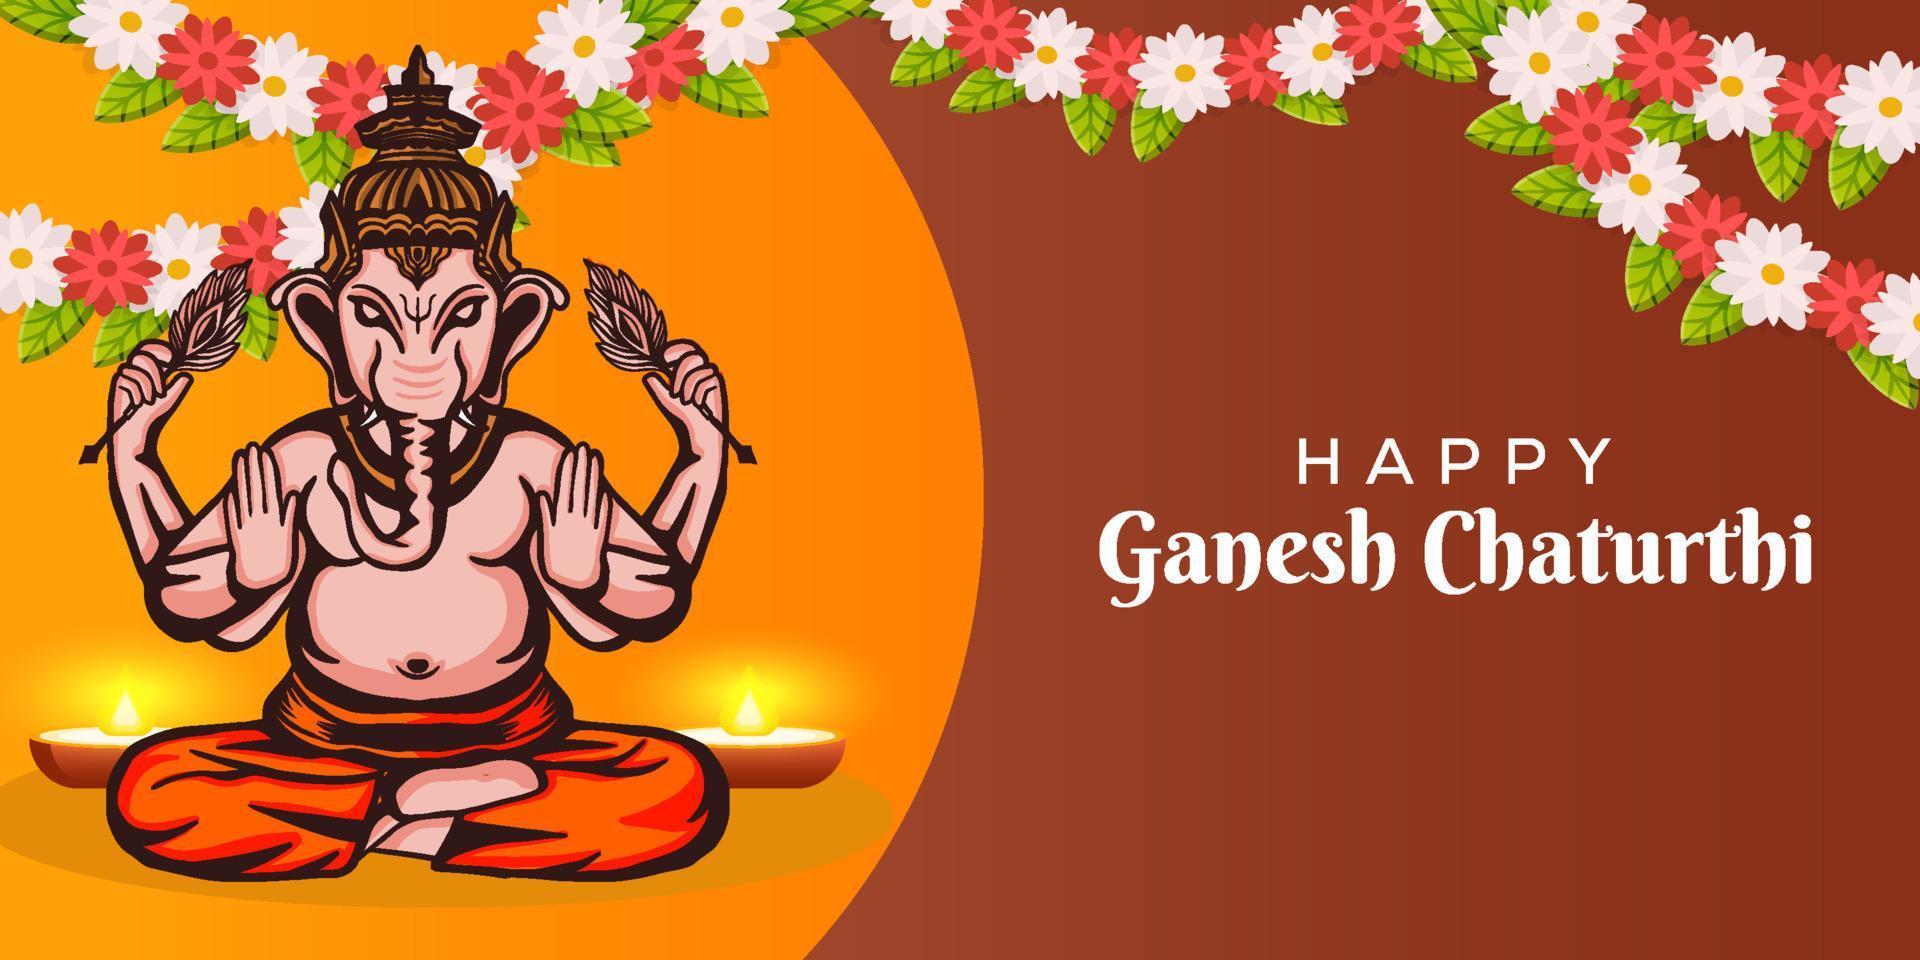 Ganesh chaturthi festival banner poster with flowers and lord Ganesh vector